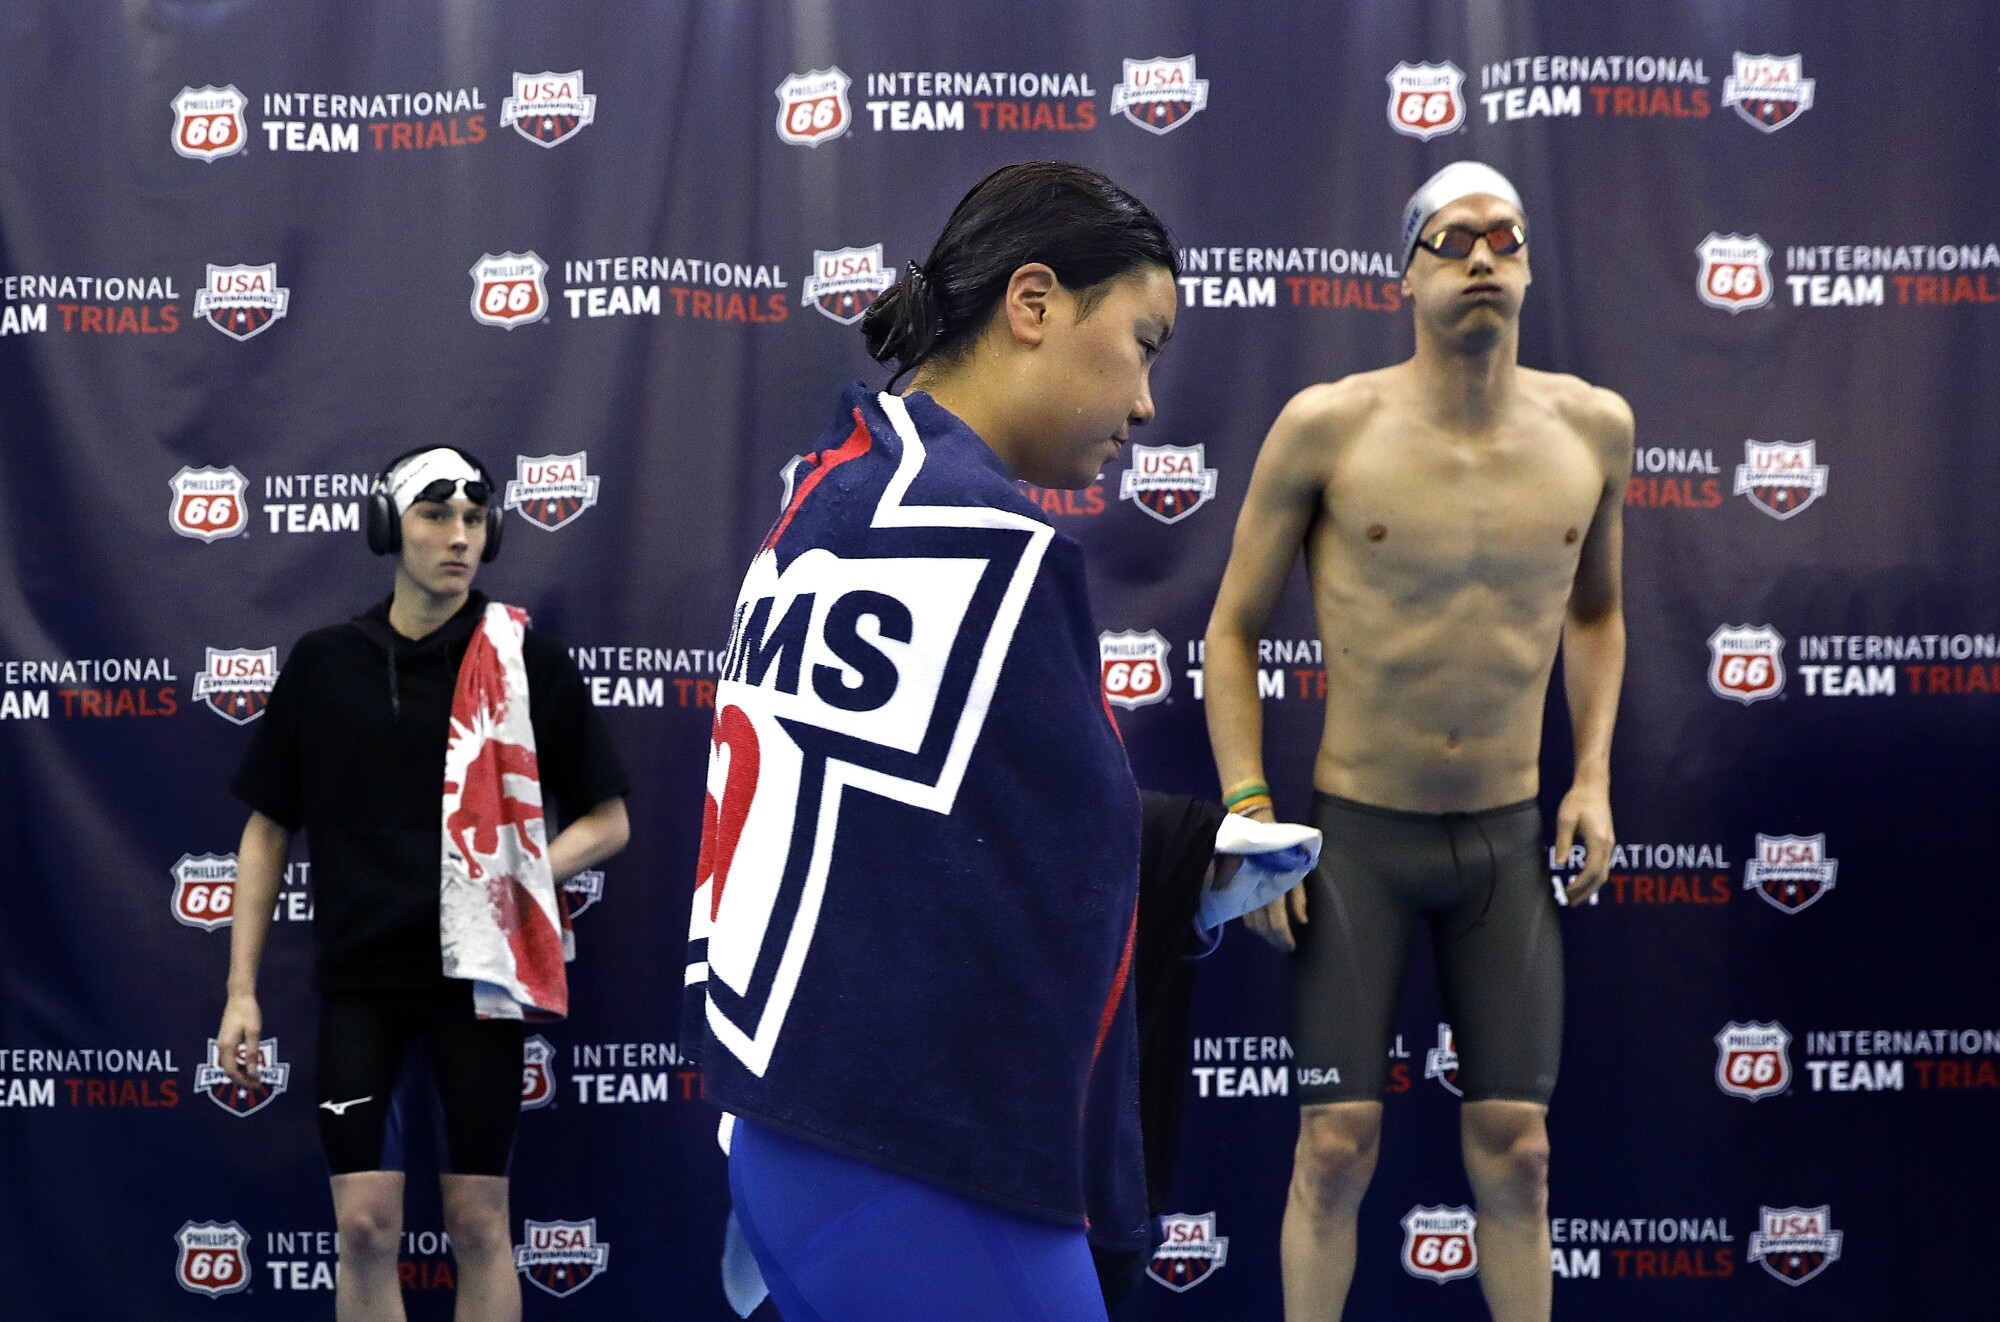 Kayla Han dries off after competing in the 2022 Phillips 66 International Team Trials.